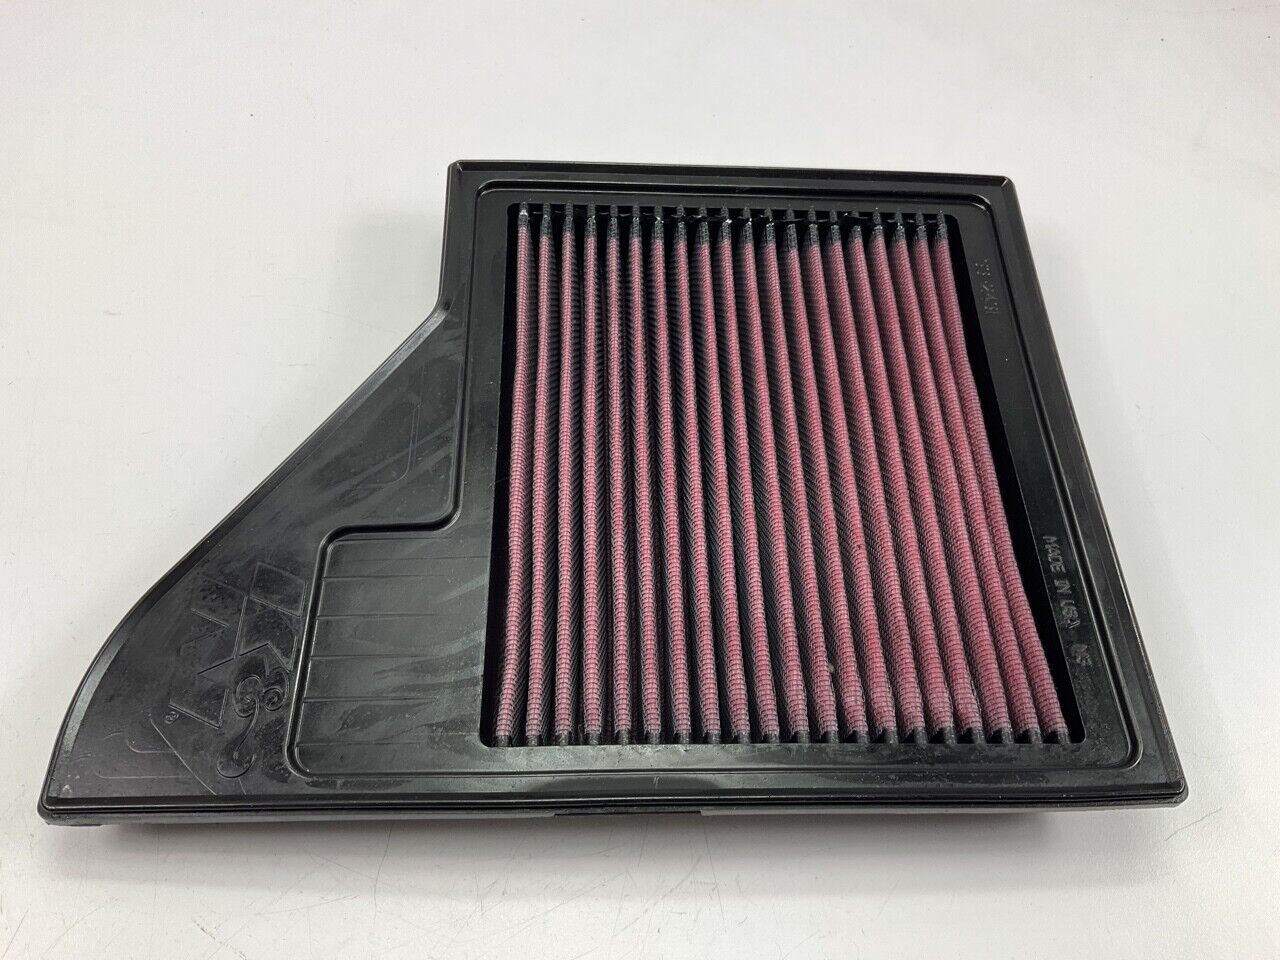 NEW - OUT OF BOX K&N SP-3395 Replacement Air Filter For 2010-2014 Ford Mustang